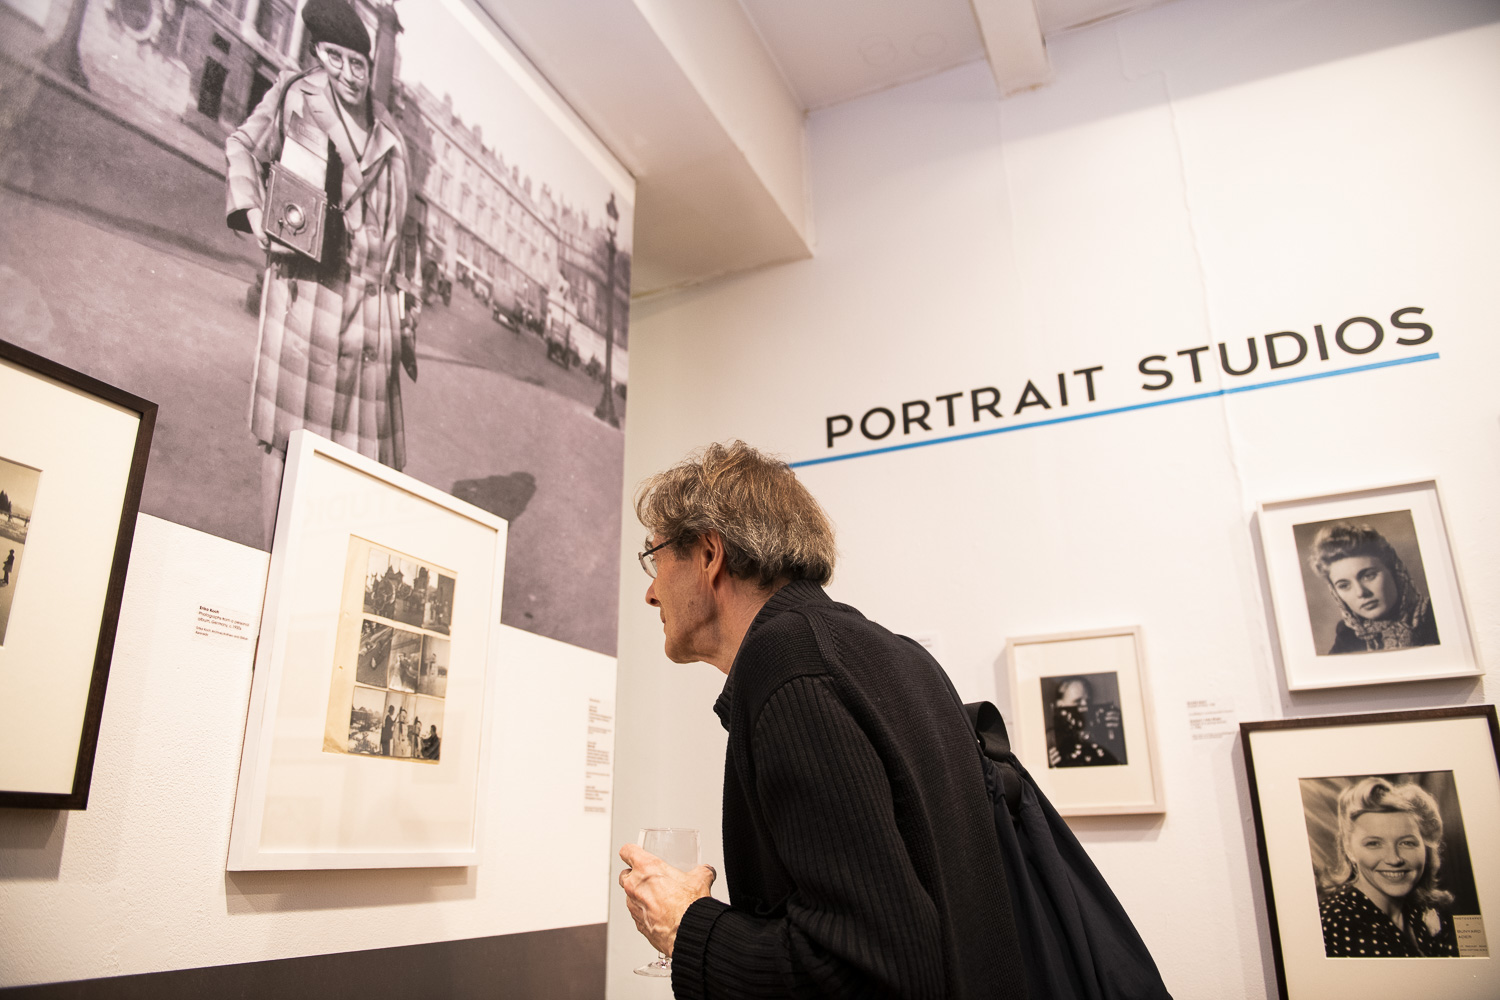 A person leans in to get a closer look at a photograph hanging on the gallery wall